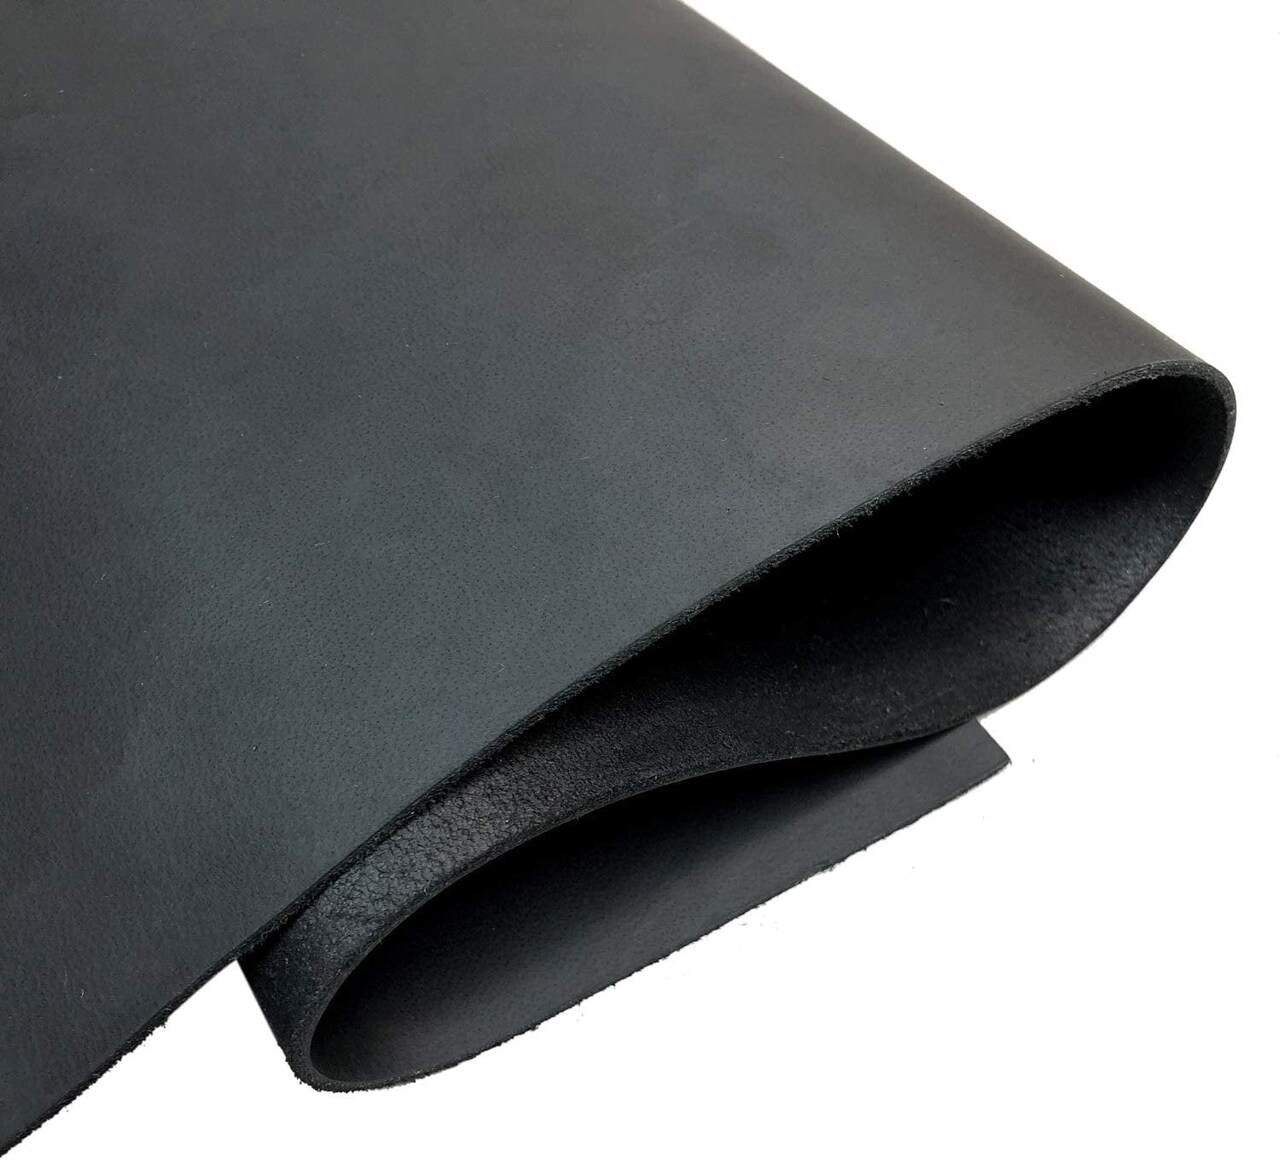 5-6 oz. (2-2.4mm) Thick Cowhide Leather Full Grain Pre-Cut Tooling Leather, Crazy-Horse Vintage Look